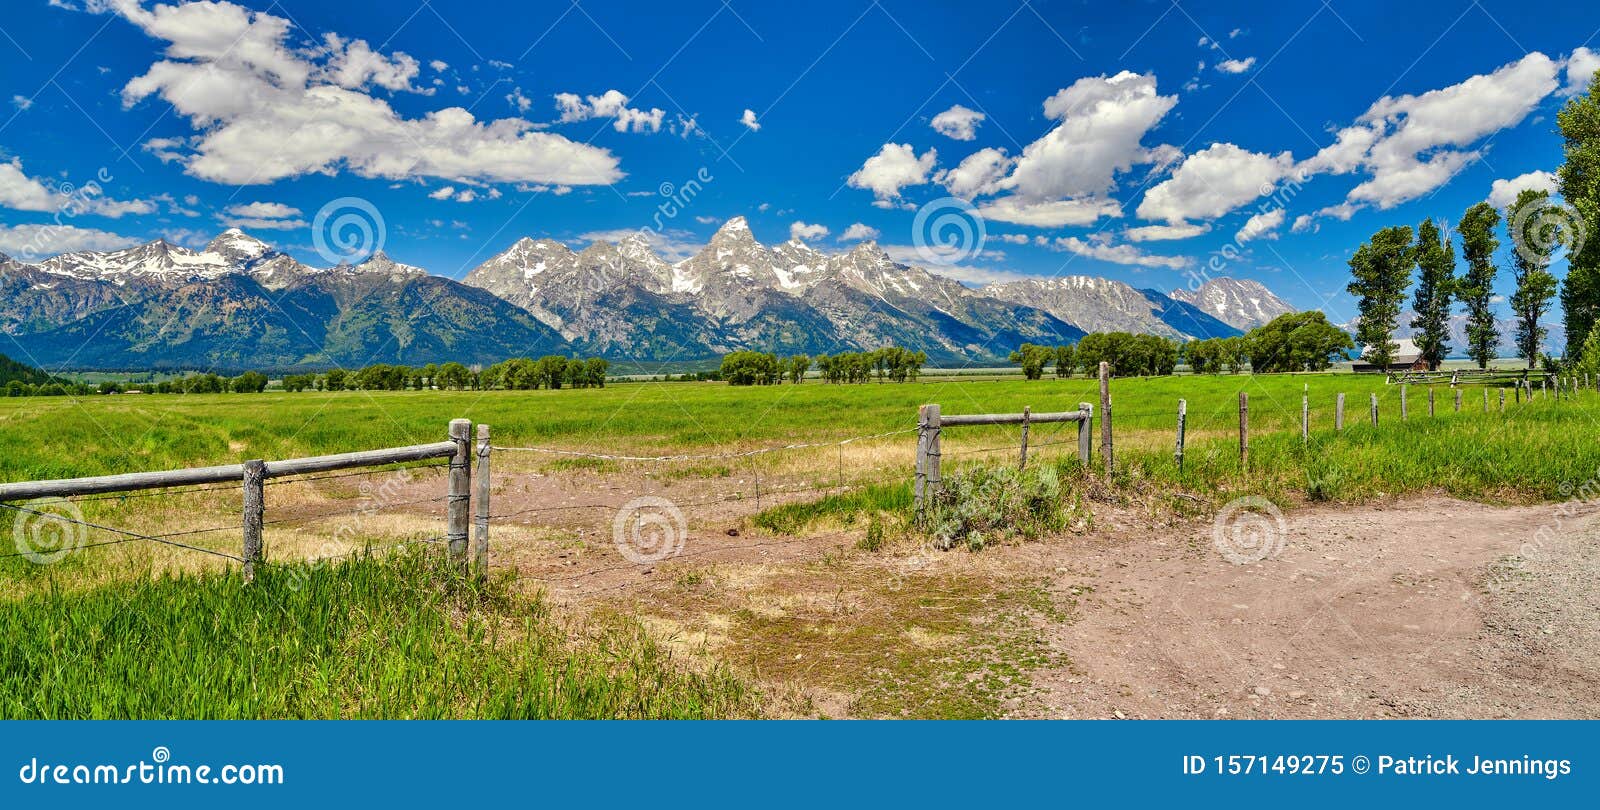 fence and field with the grand teton mountians in the background